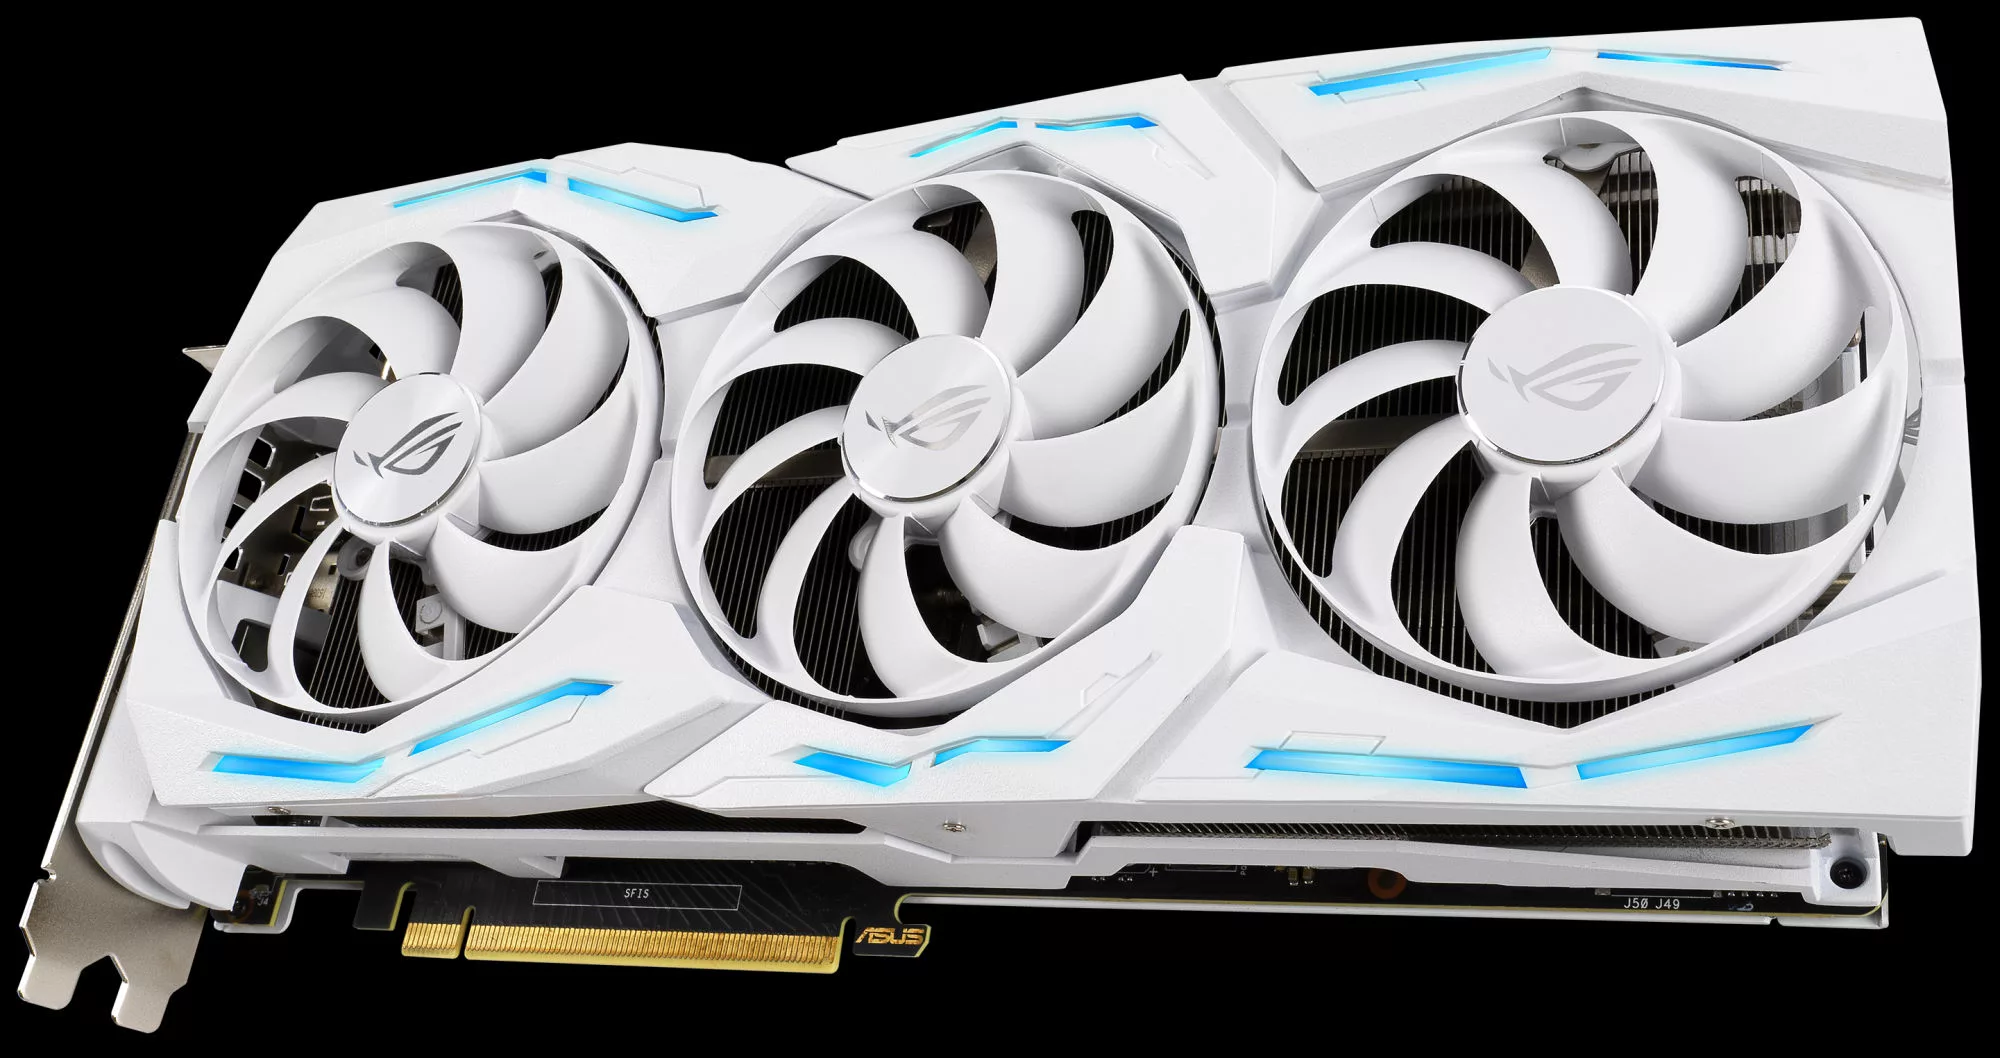 Fire and ice meet in the ROG Strix GeForce RTX 2080 Ti White Edition | ROG  - Republic of Gamers